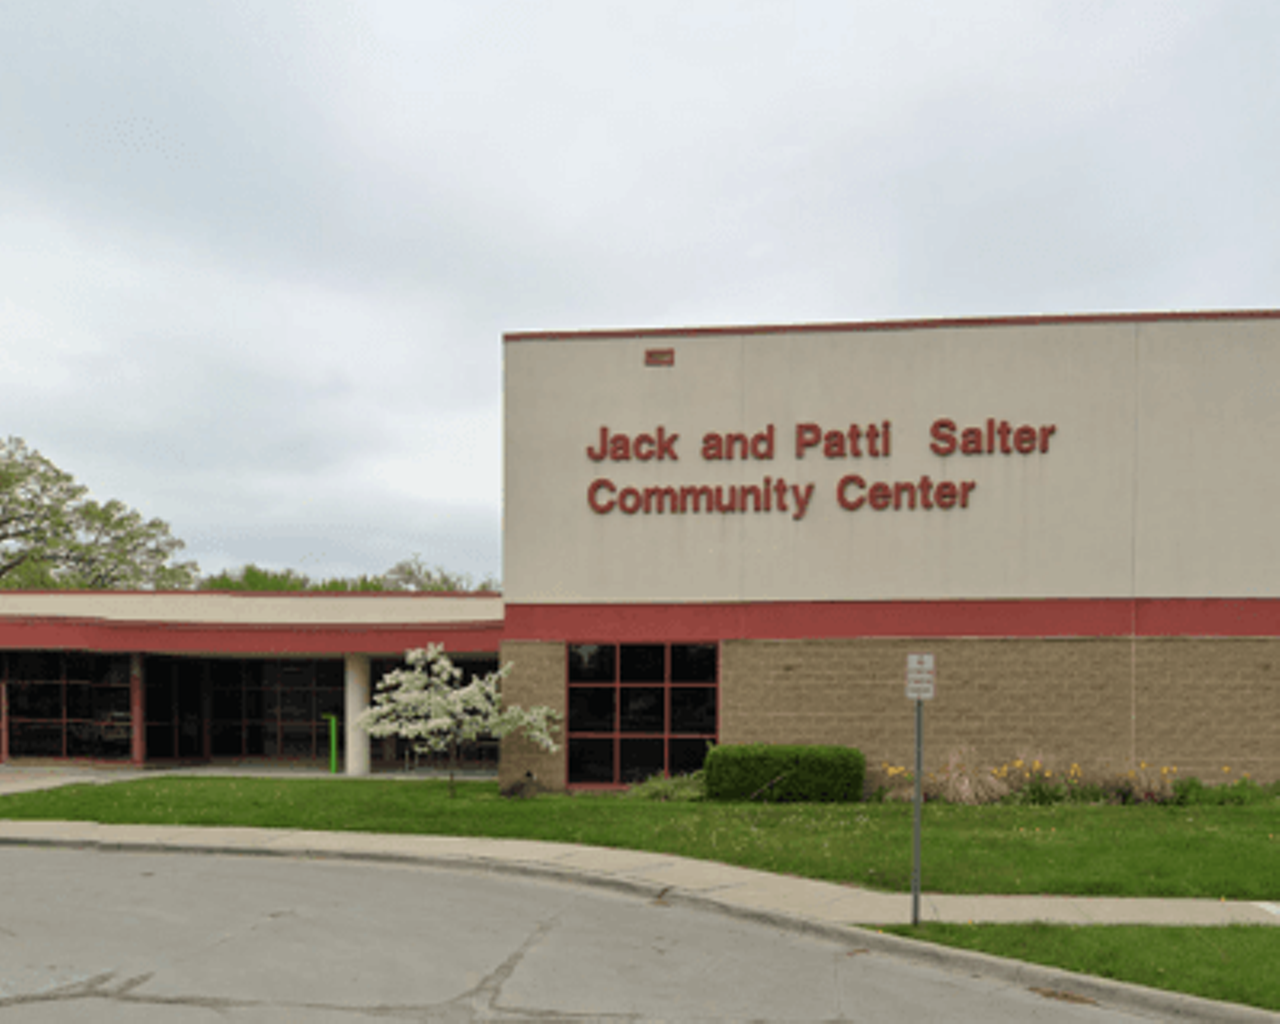 Jack & Patti Salter Community Center
1545 E. Lincoln, Royal Oak; 248-246-3180; romi.gov
Located in the center’s gymnasium, the pickleball courts are open from 11-3 p.m. on Monday, Wednesday, and Friday, and 1-3 p.m. on Tuesday. 